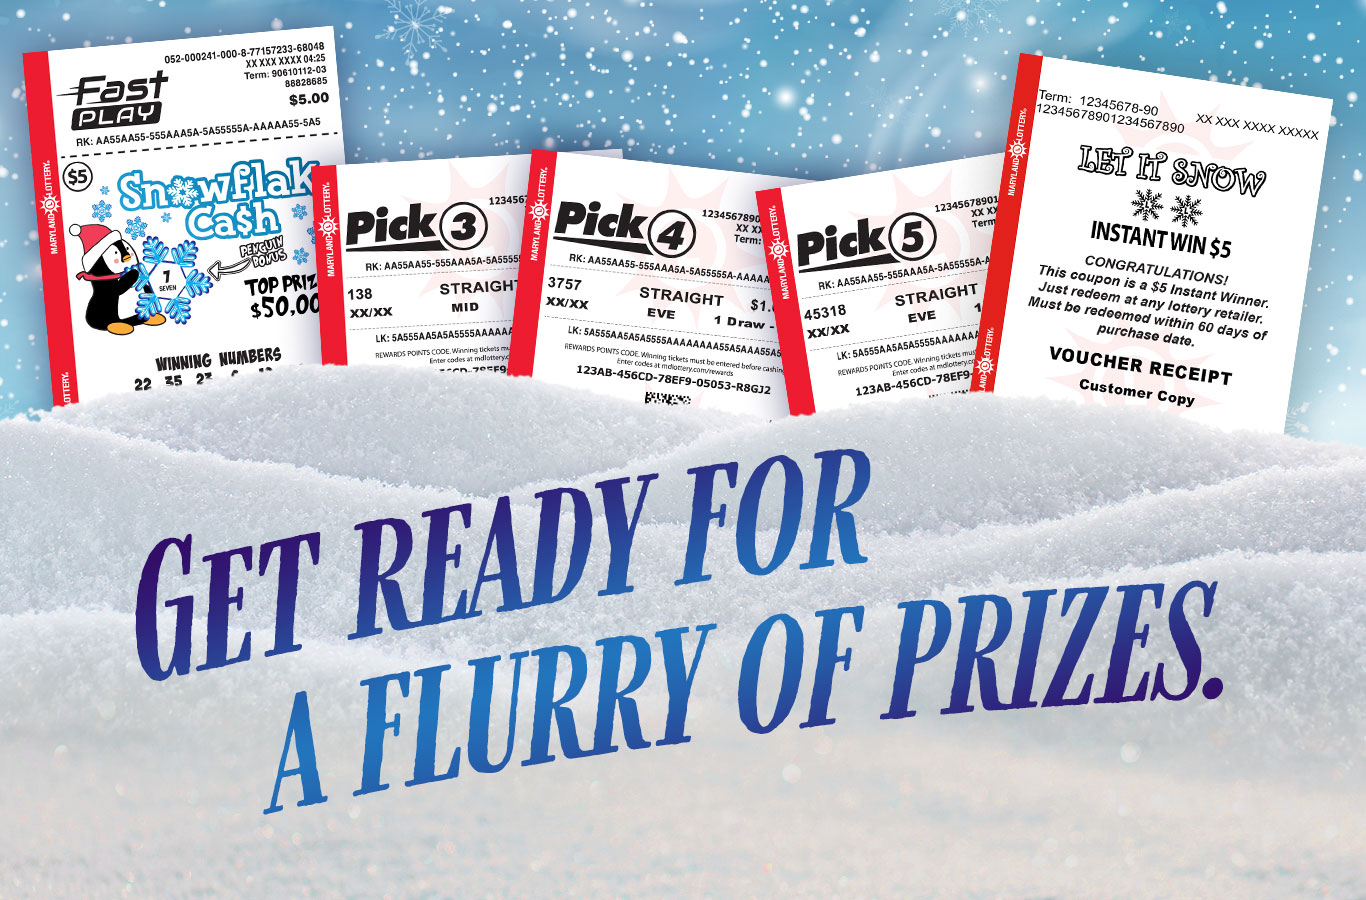 Play Pick 3, Pick 4, and/or Pick 5 for a chance to win cash or a free FAST PLAY ticket through December 25th.